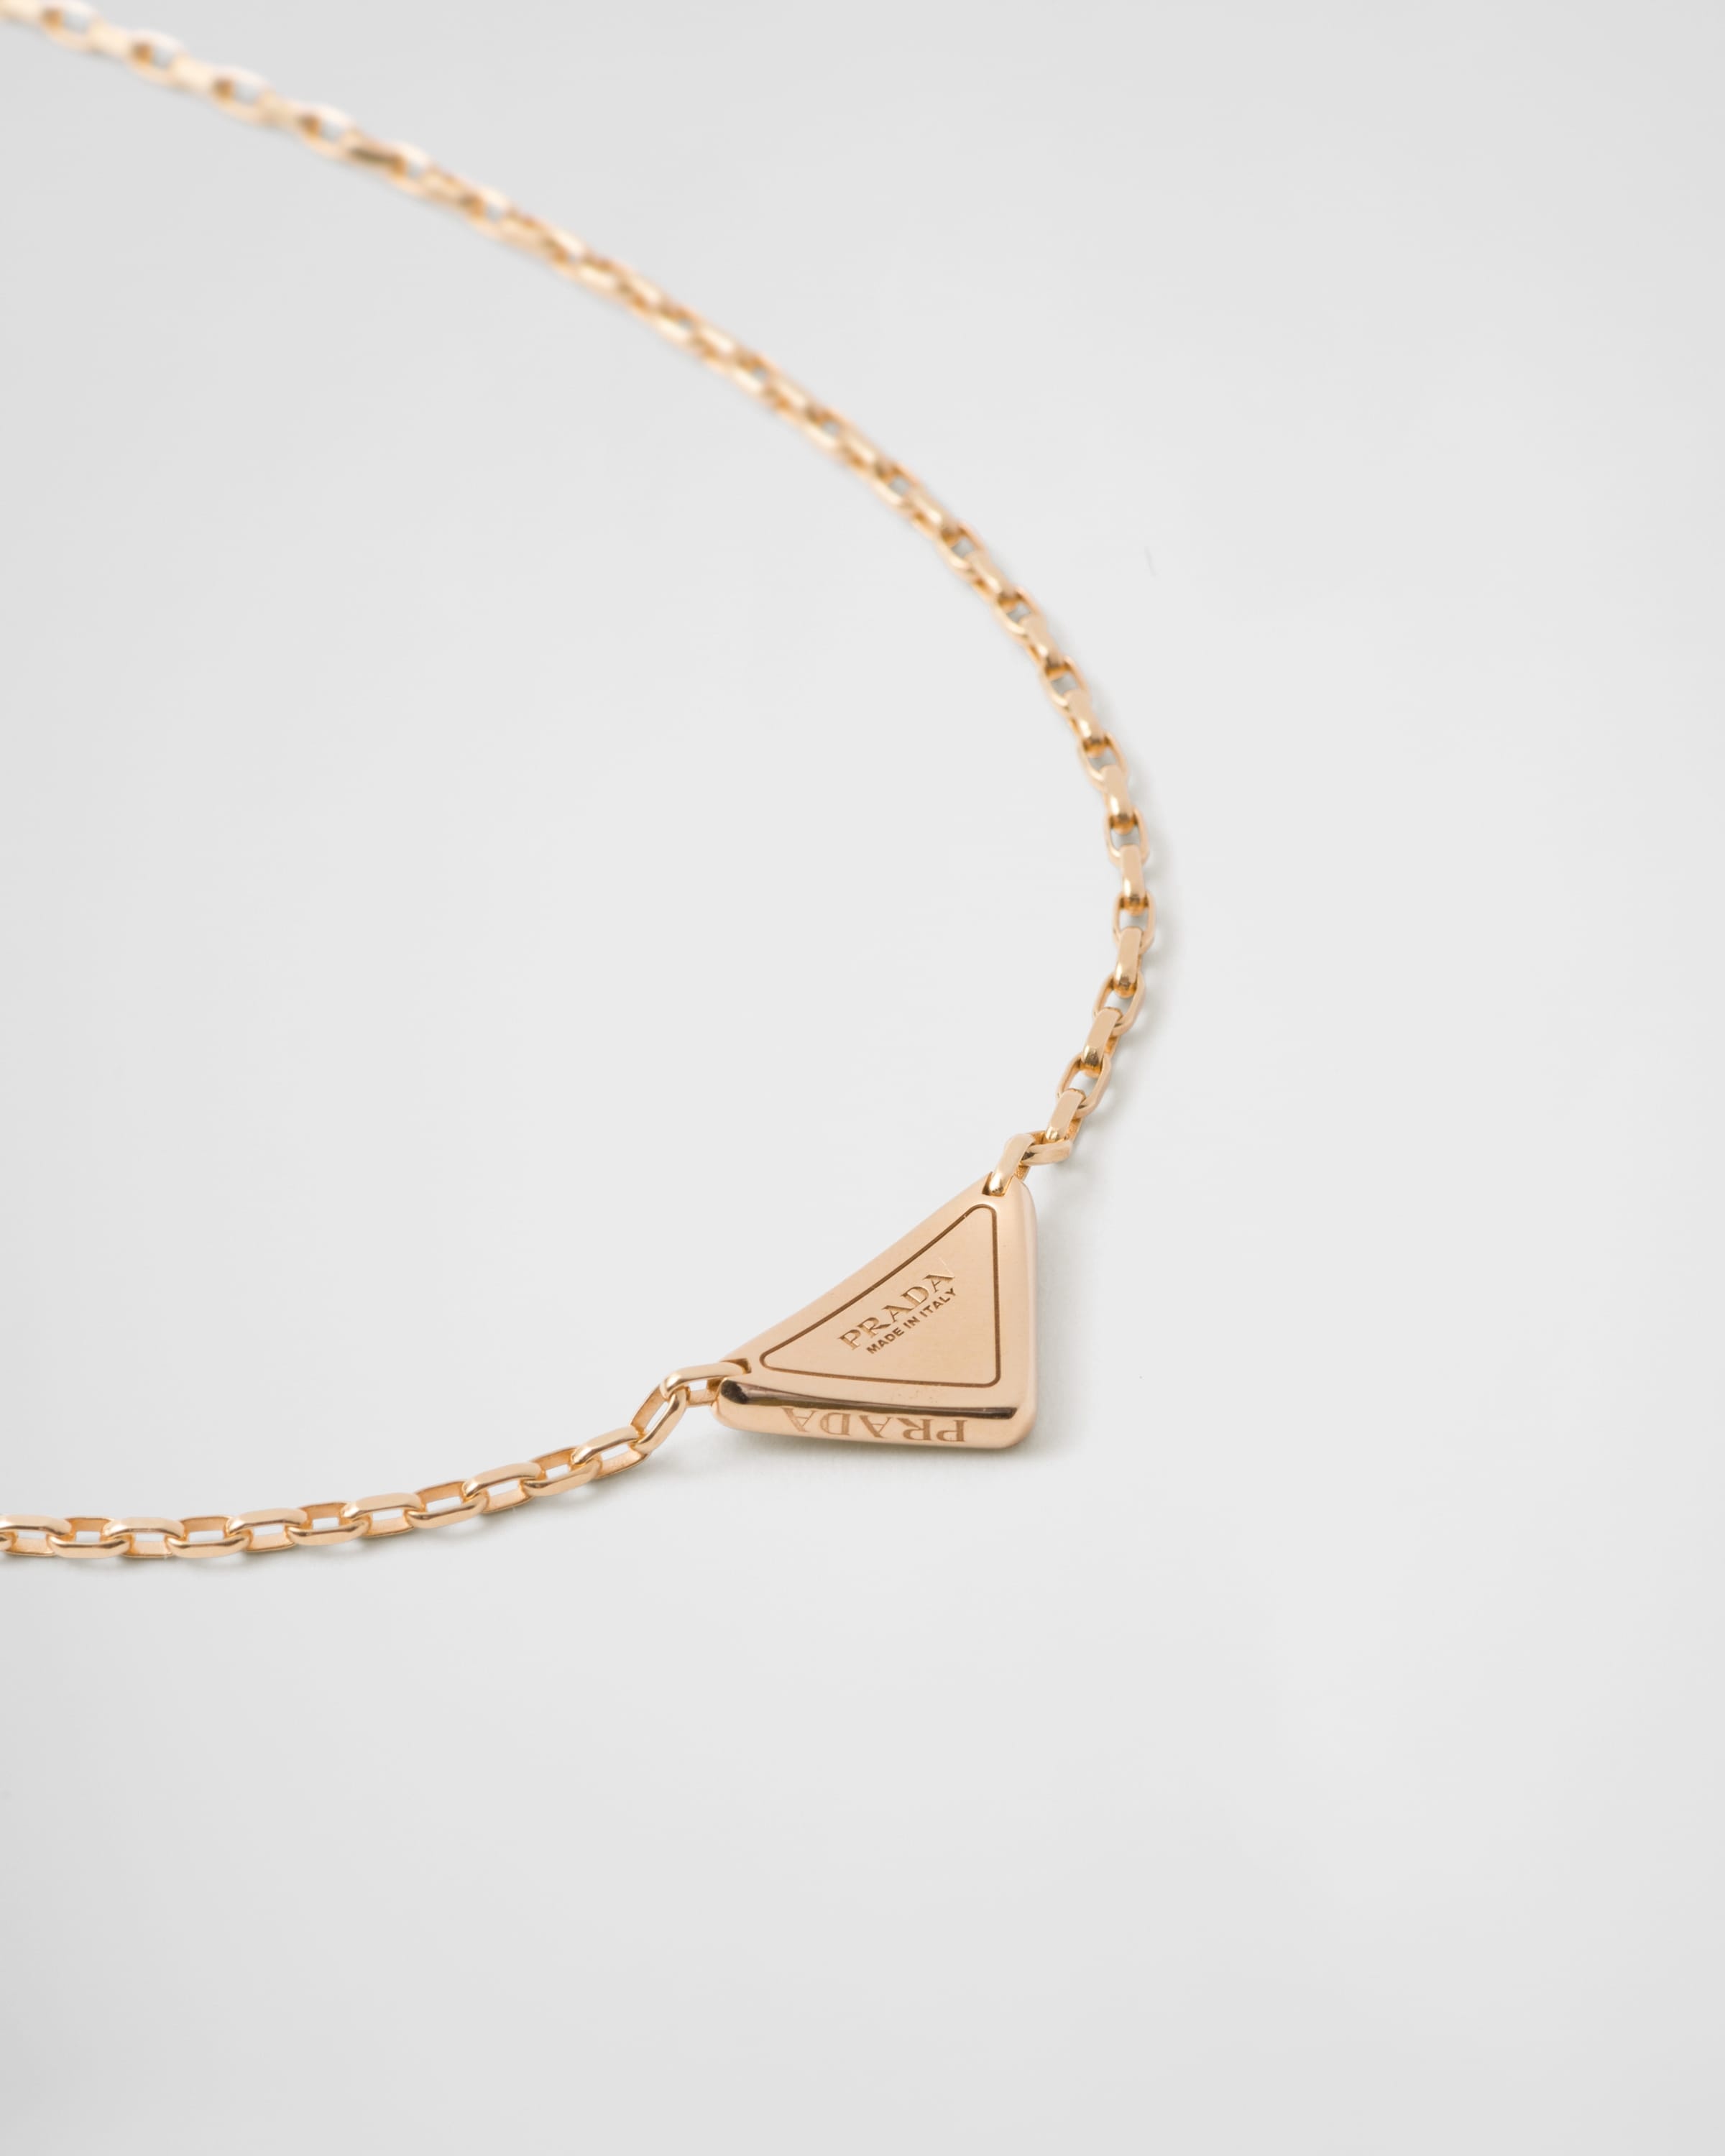 Eternal Gold Eternal mini triangle pendant necklace in yellow gold and diamonds - 2